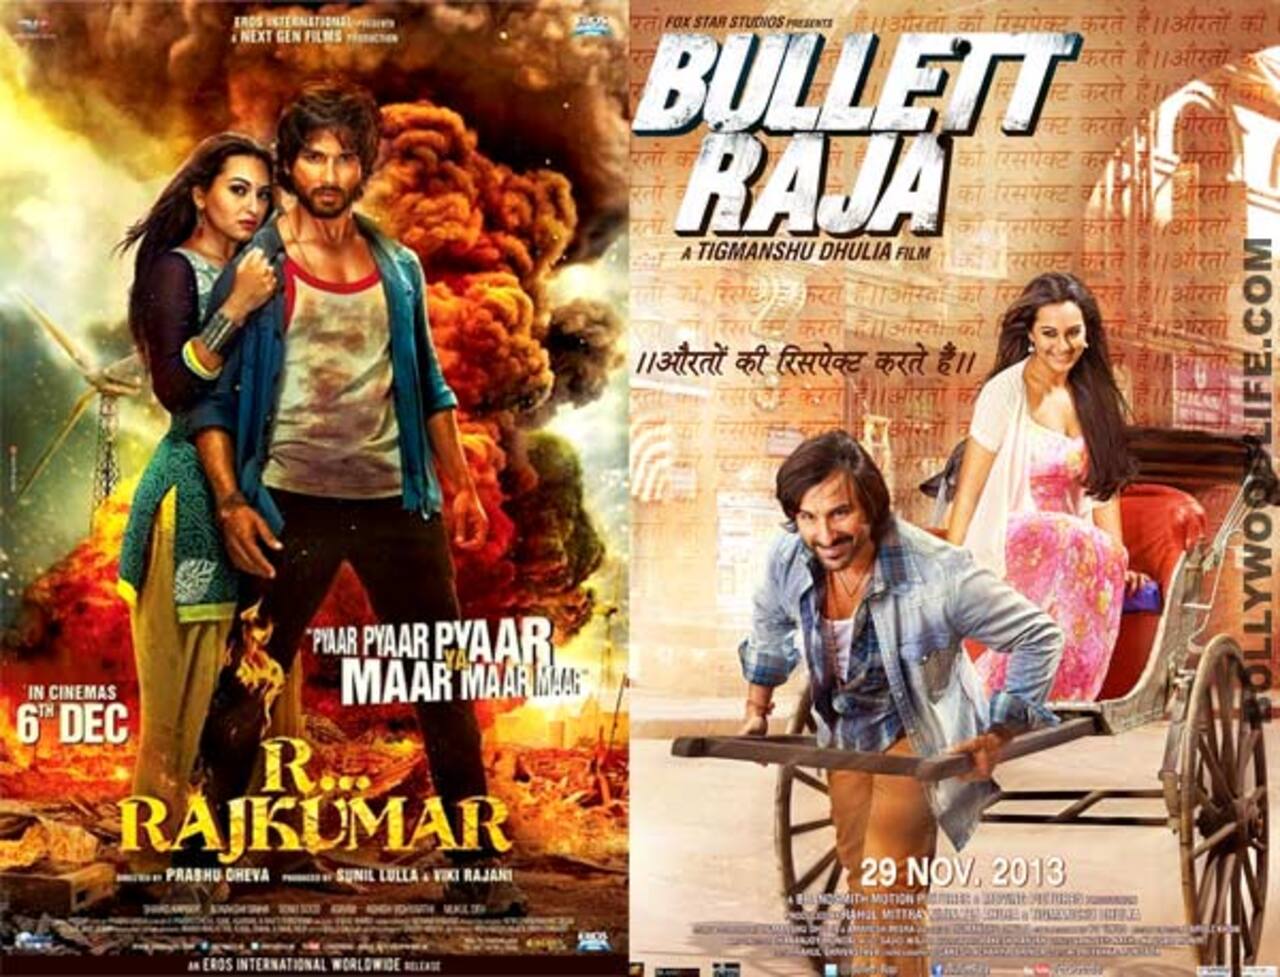 Who does Sonakshi Sinha pair better with - Shahid Kapoor or Saif Ali Khan?